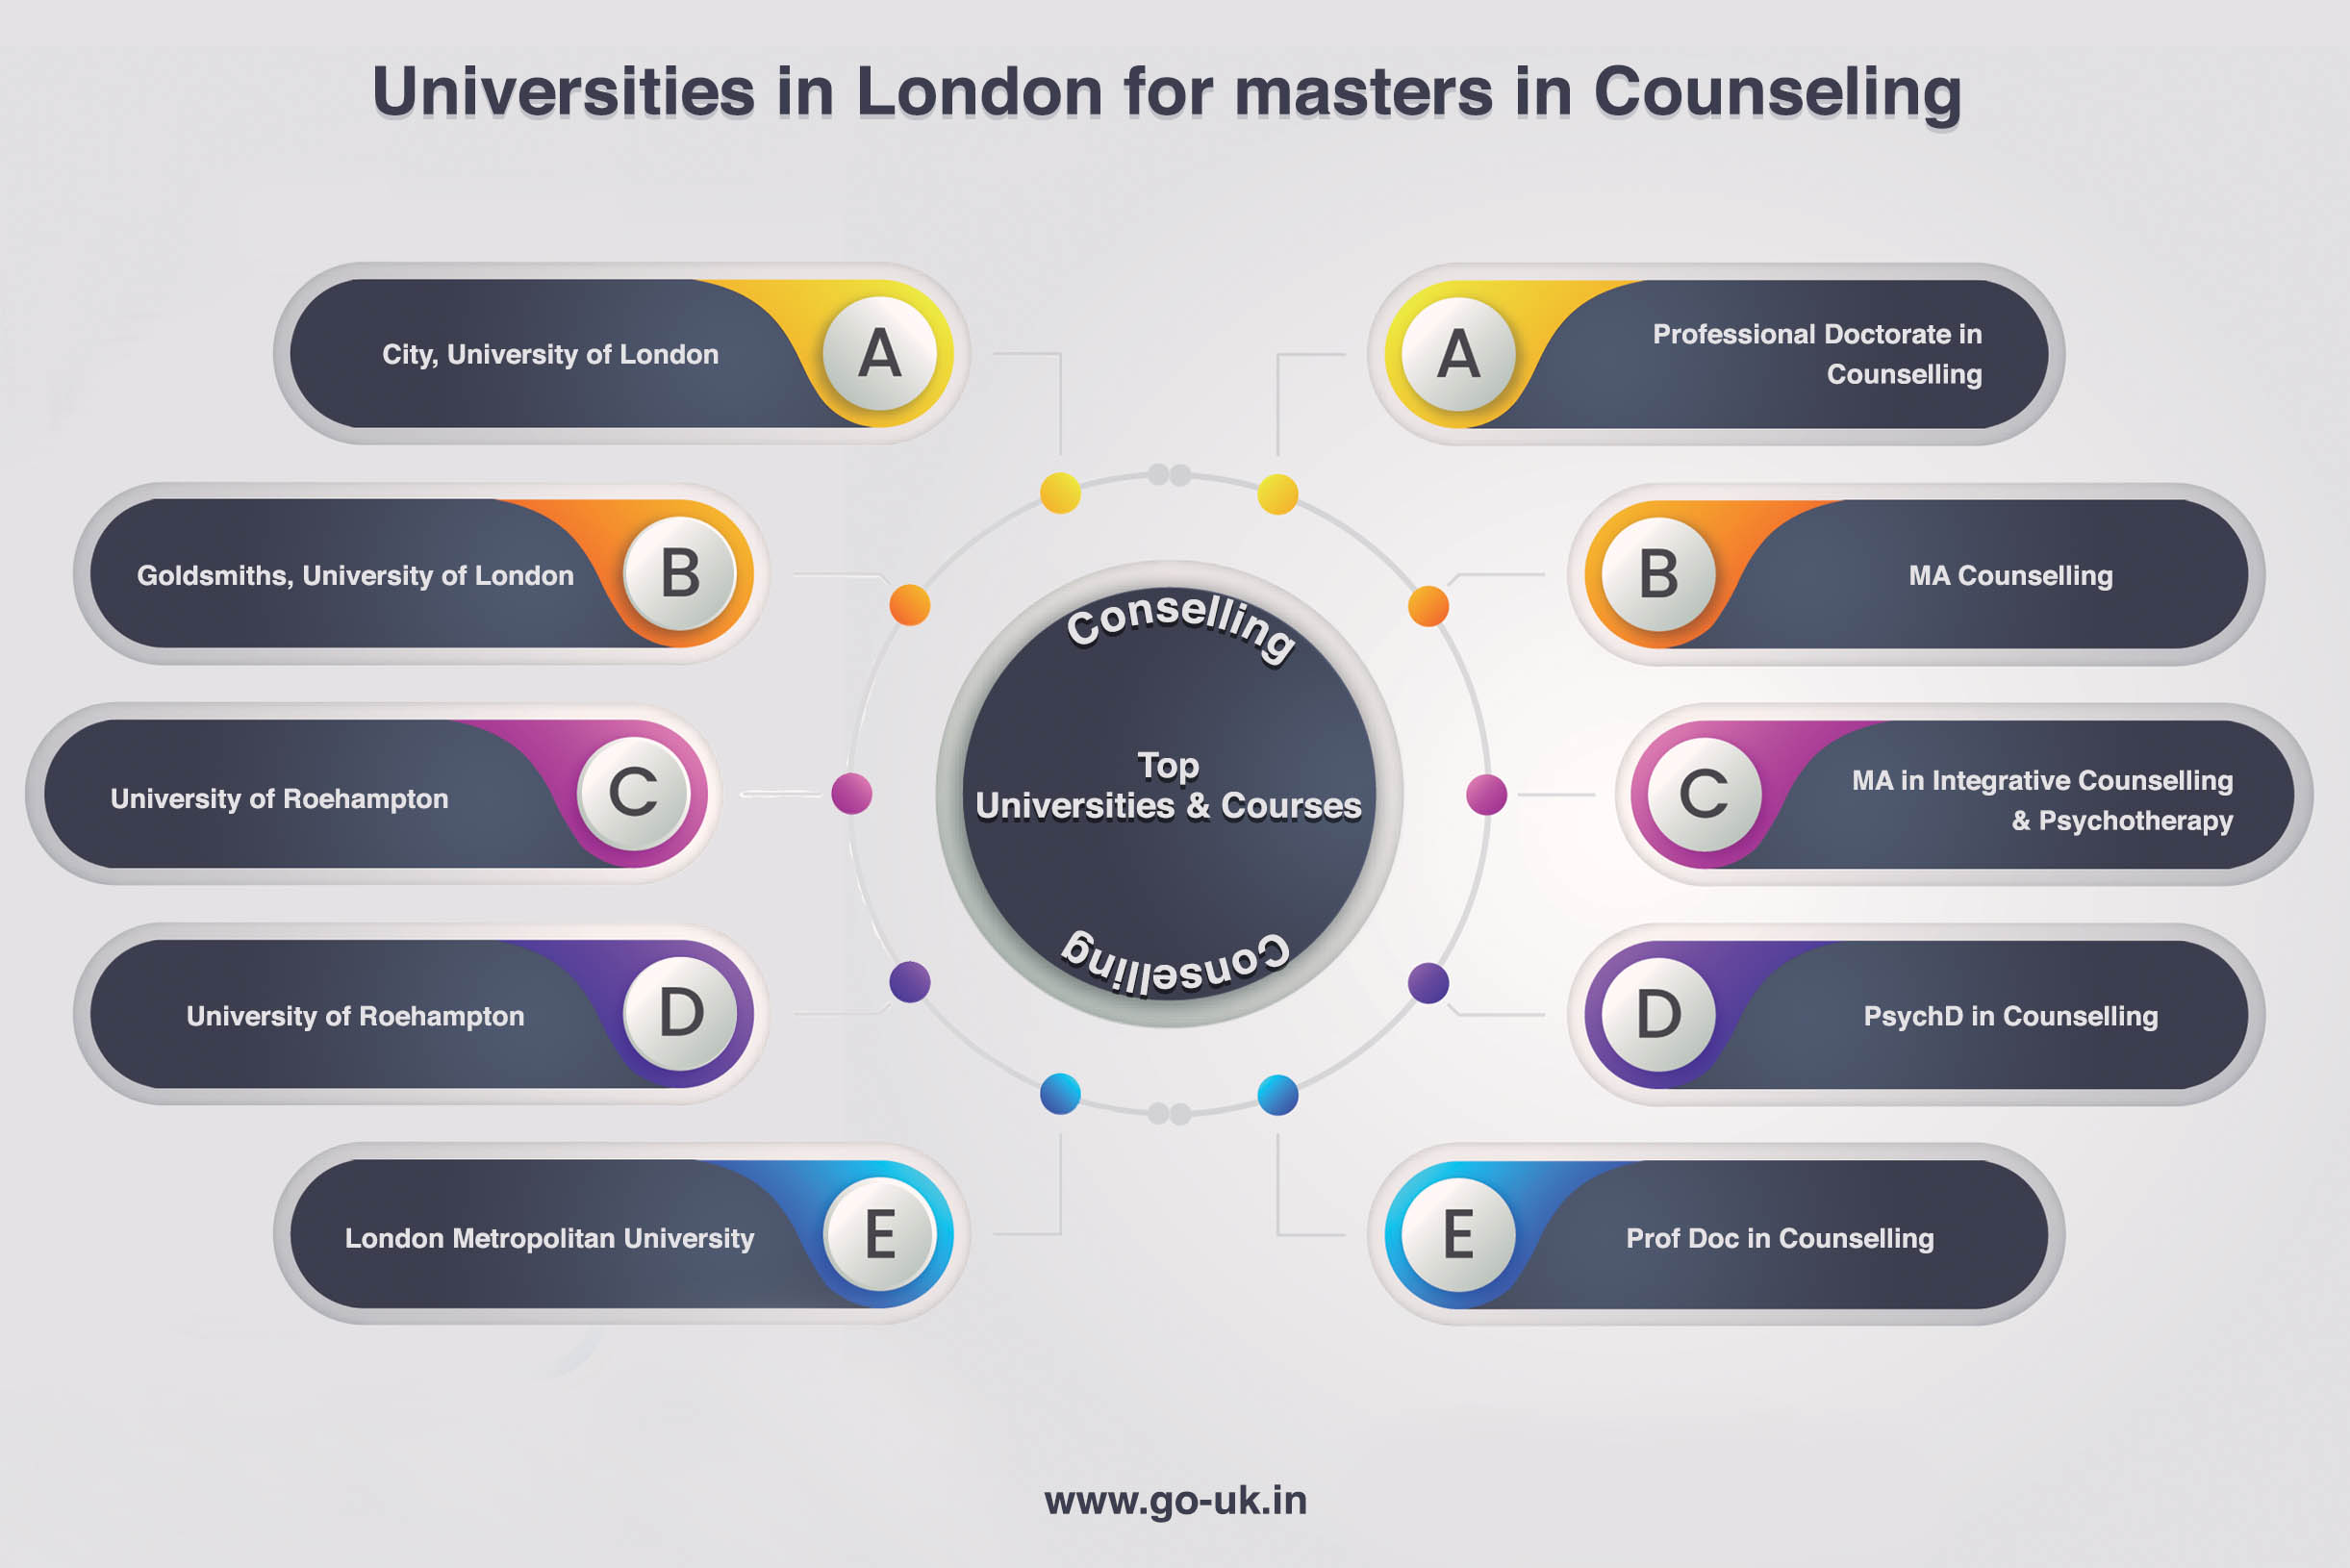 Universities in London for Masters in Counselling